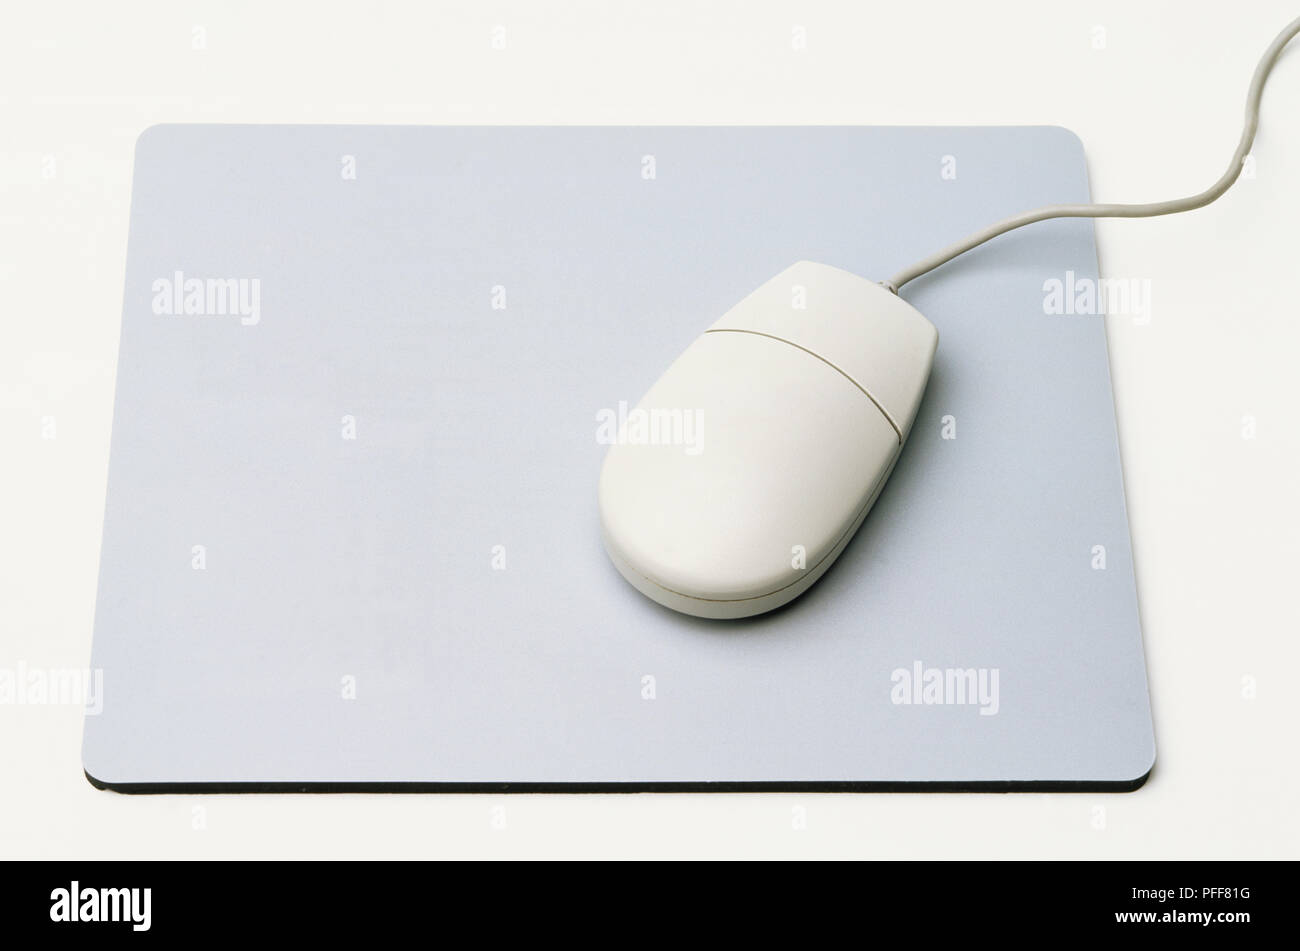 Computer mouse resting on mouse mat with integrated calculator, front view. Stock Photo